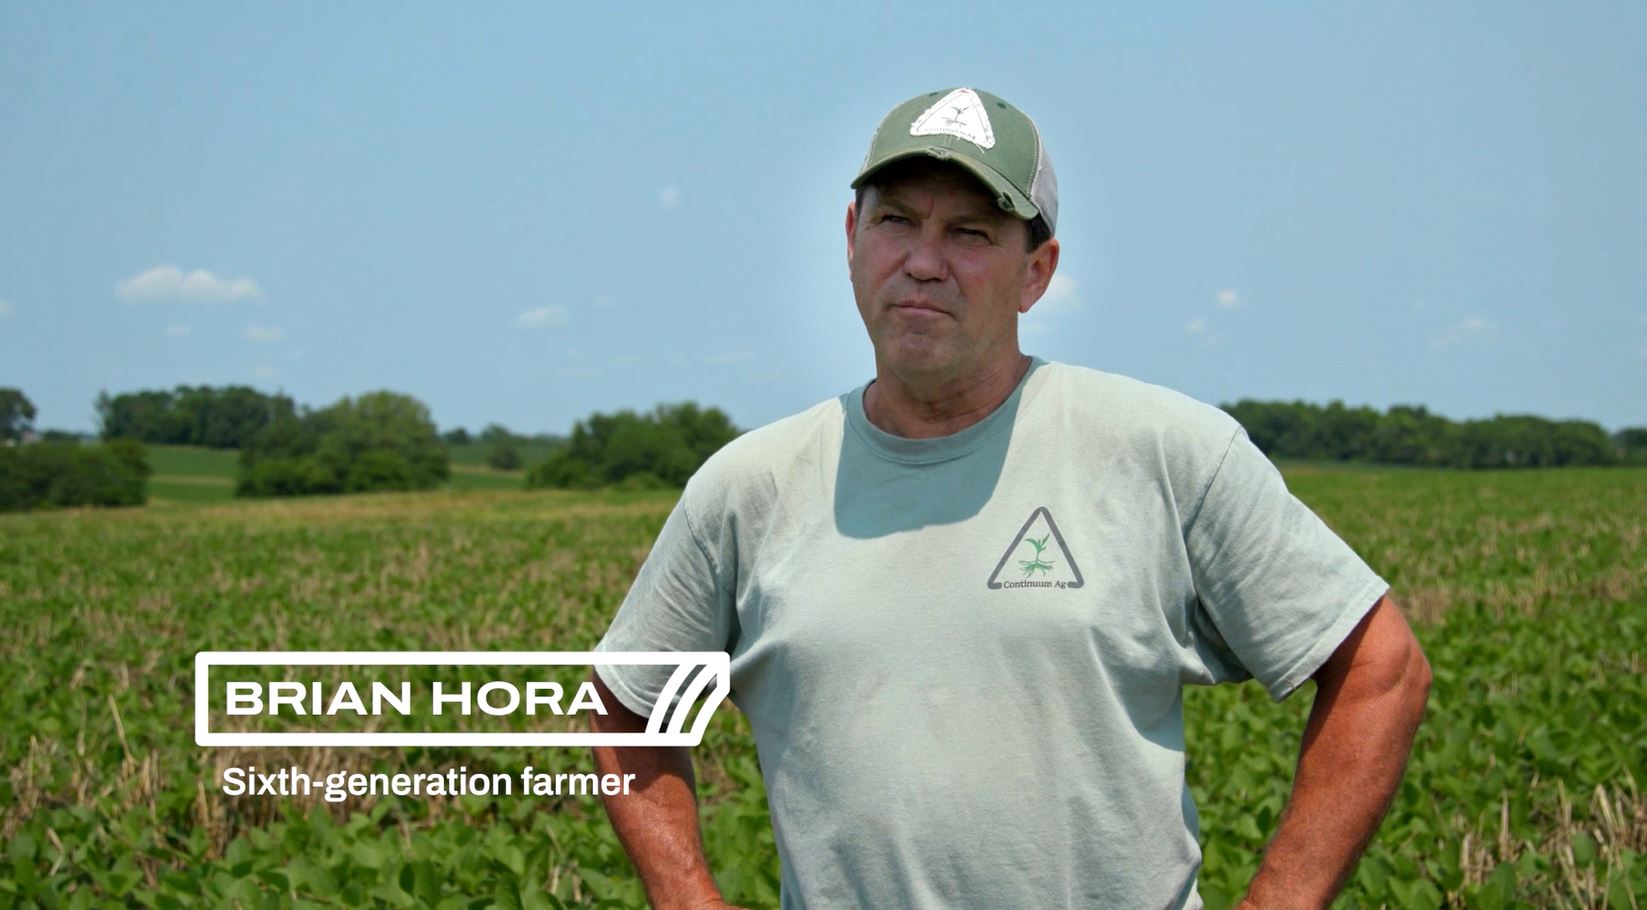 Iowa soybean farmer using conservation practices